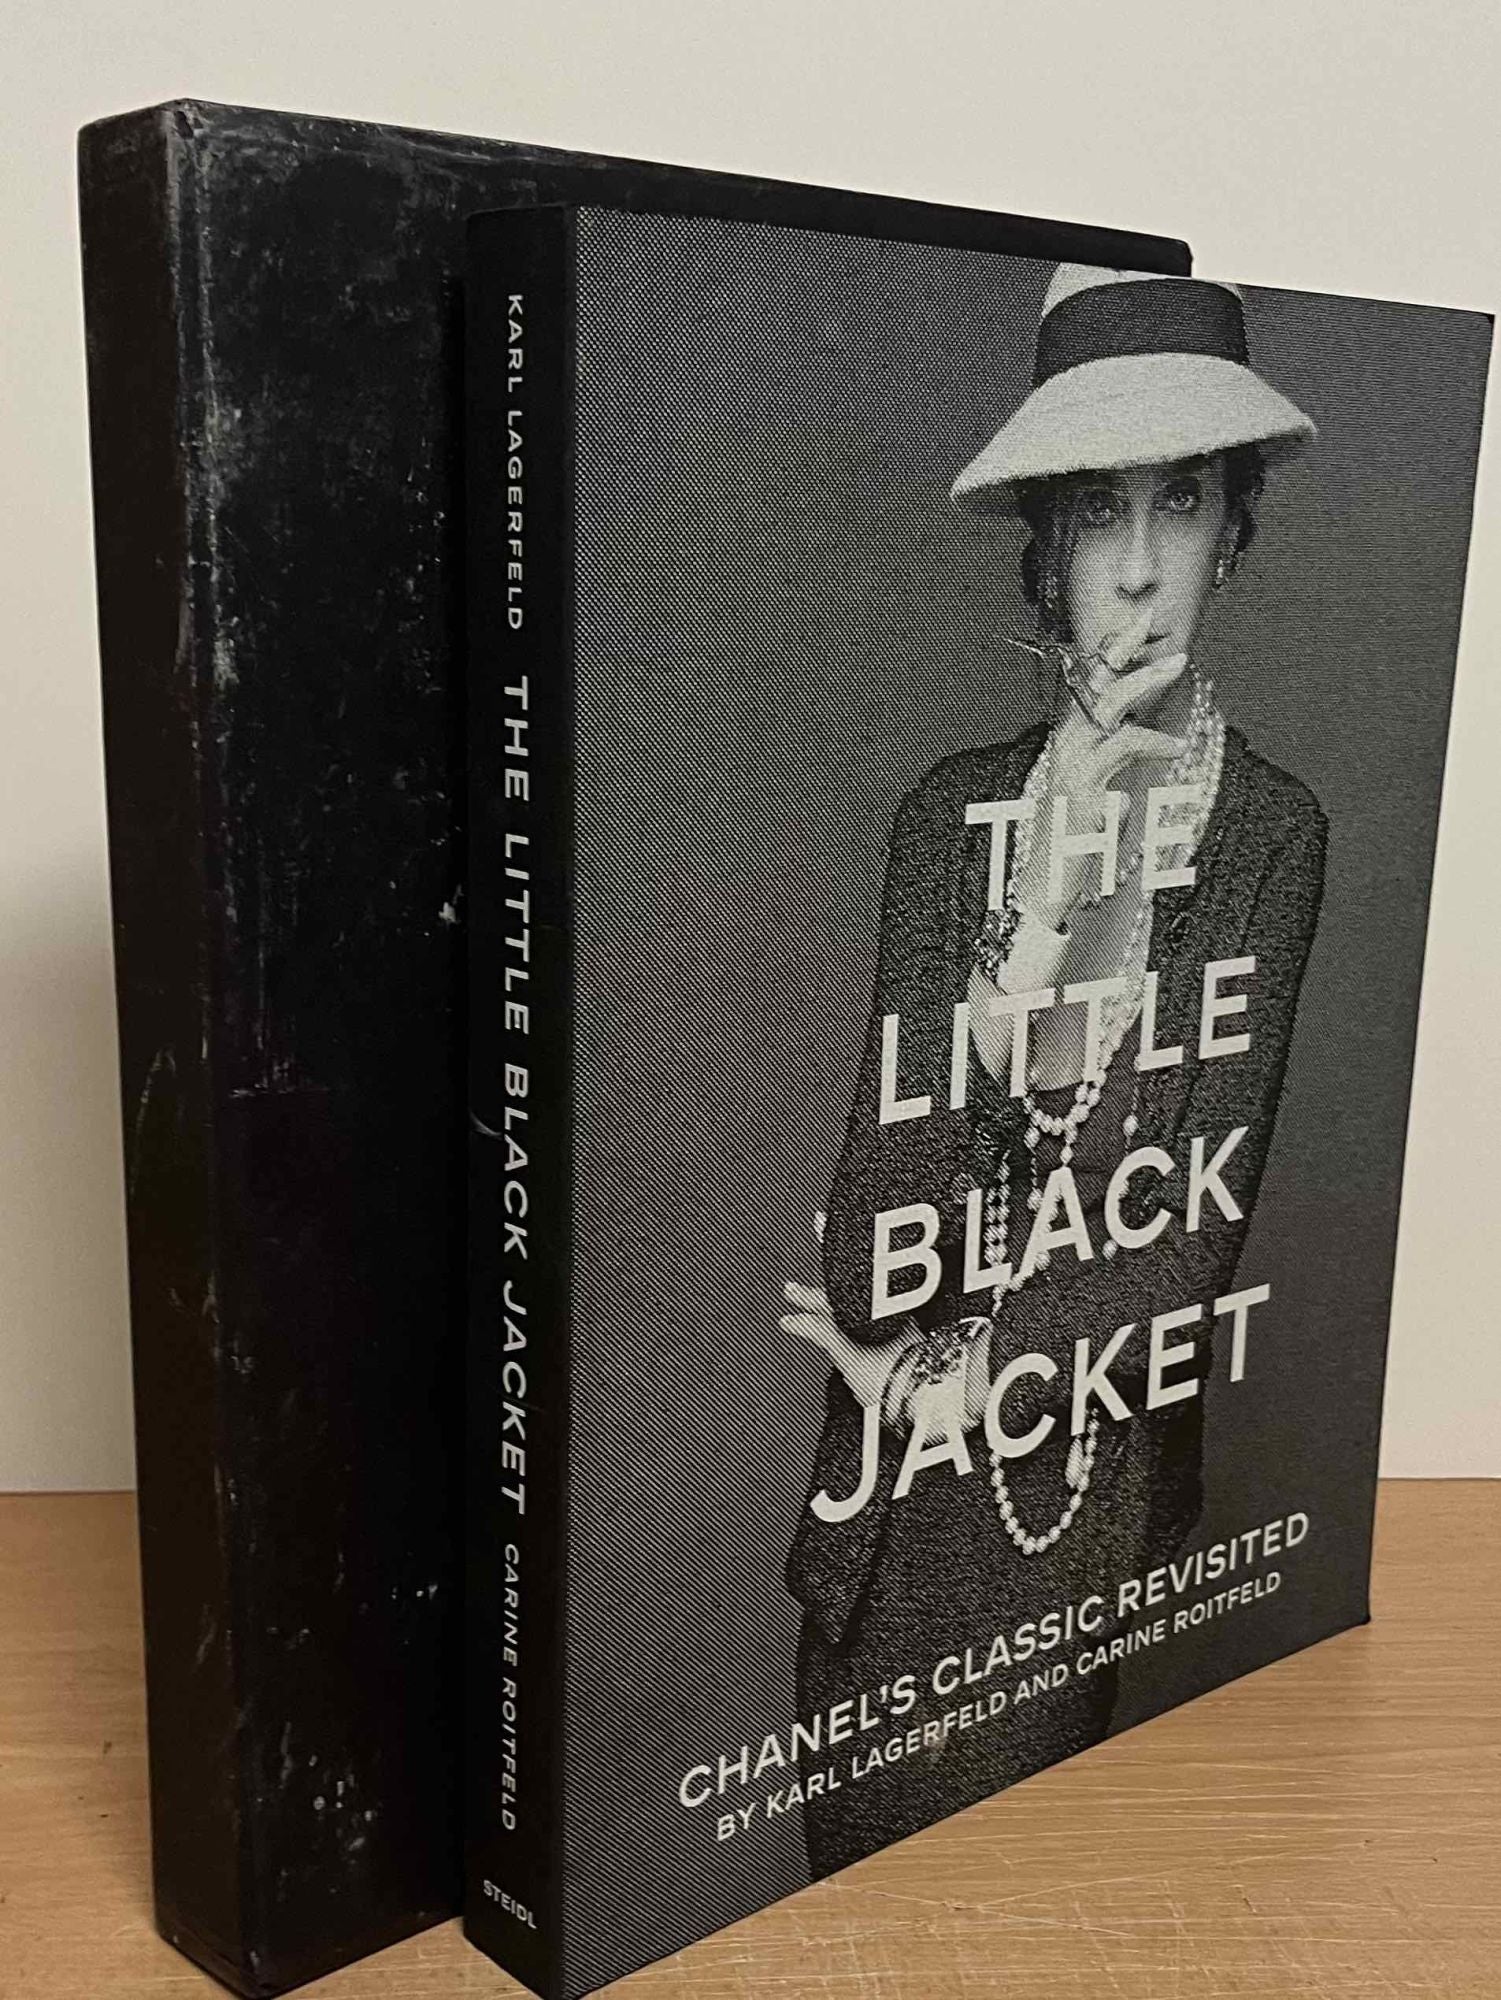 The Little Black Jacket: Chanel's Classic Revisited - Harvard Book Store